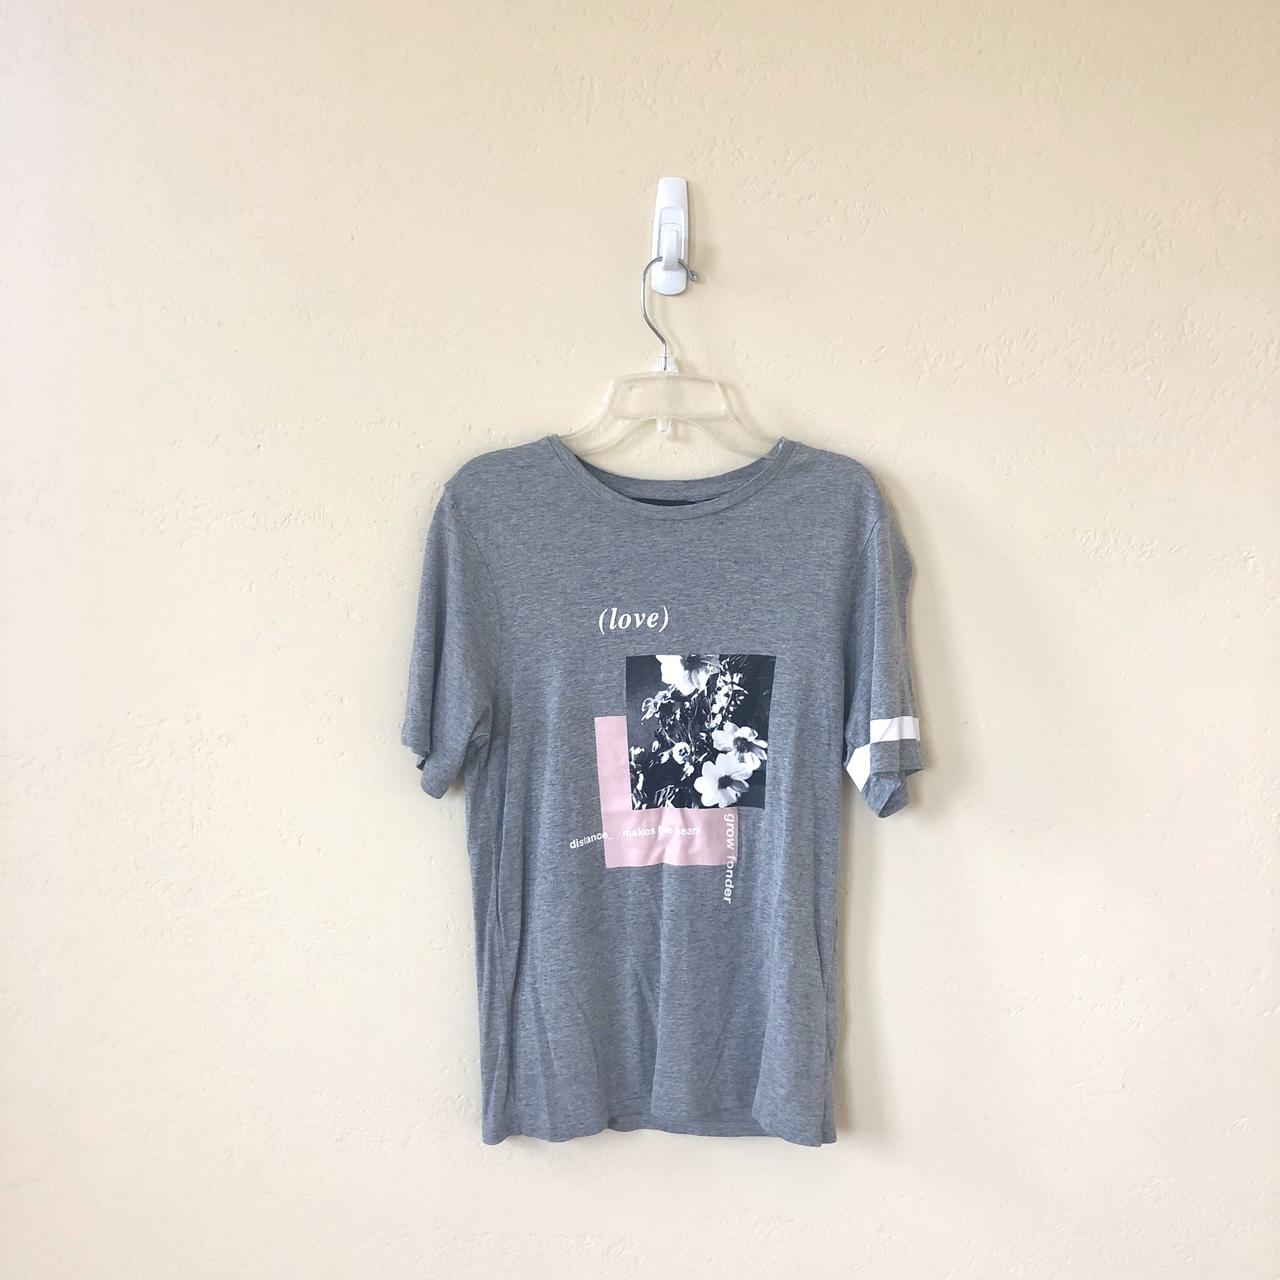 New Look Women's Grey and Pink T-shirt